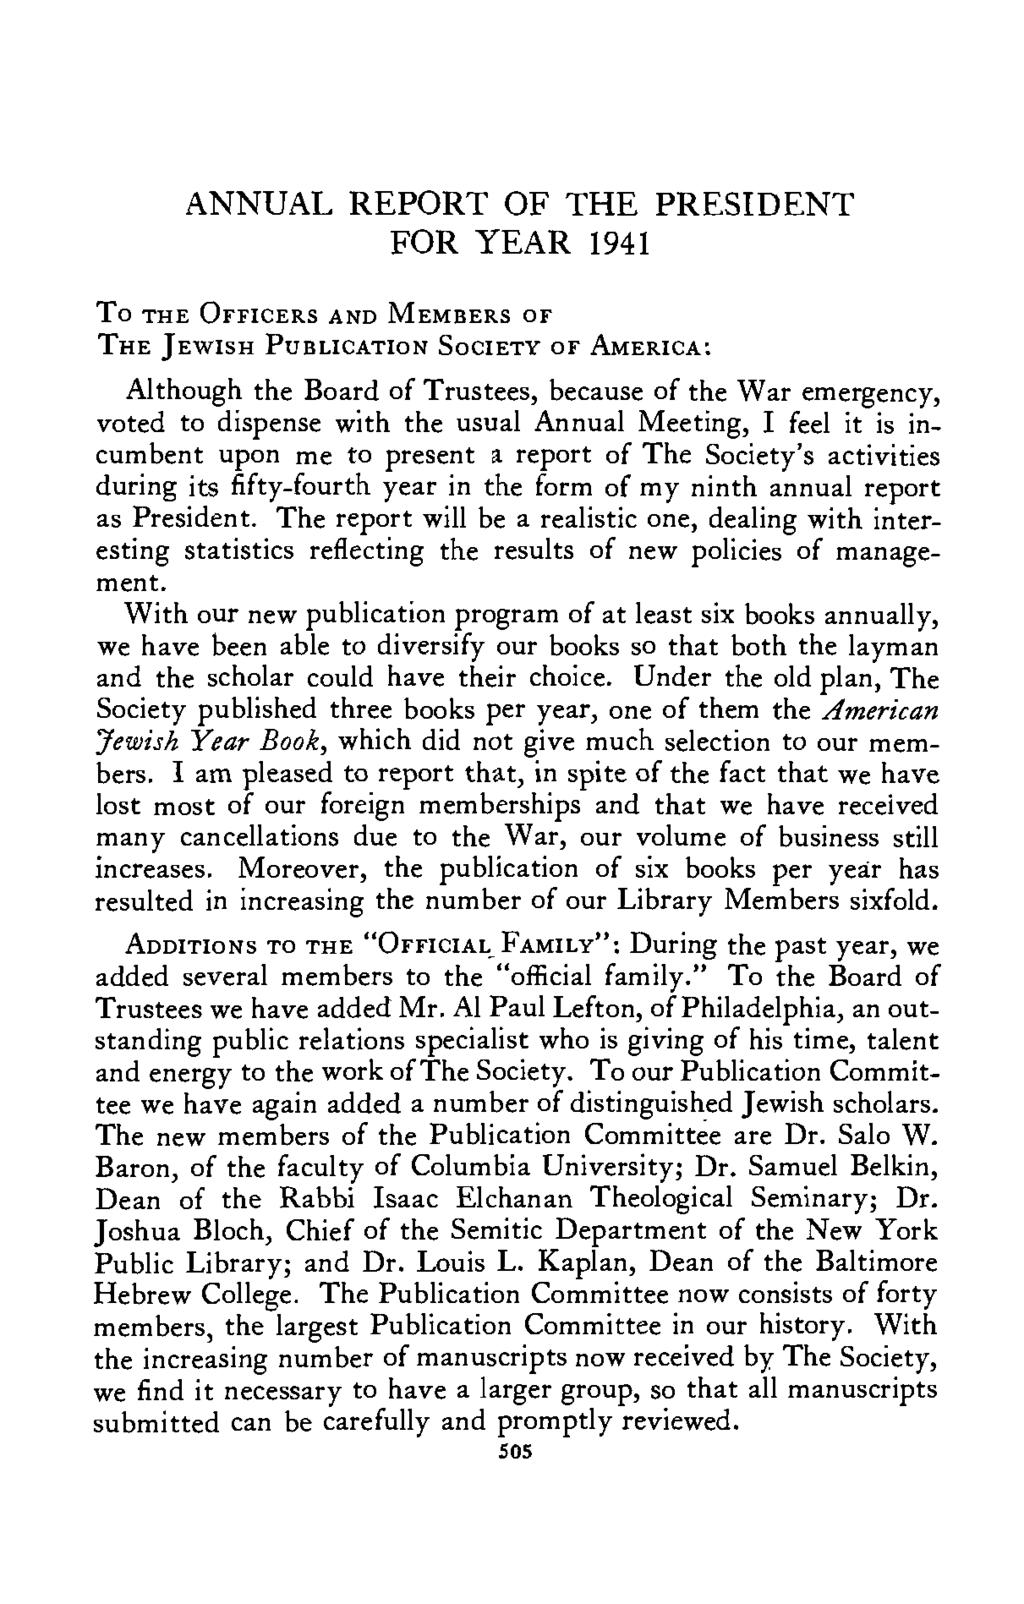 ANNUAL REPORT OF THE PRESIDENT FOR YEAR 1941 To THE OFFICERS AND MEMBERS OF THE JEWISH PUBLICATION SOCIETY OF AMERICA: Although the Board of Trustees, because of the War emergency, voted to dispense